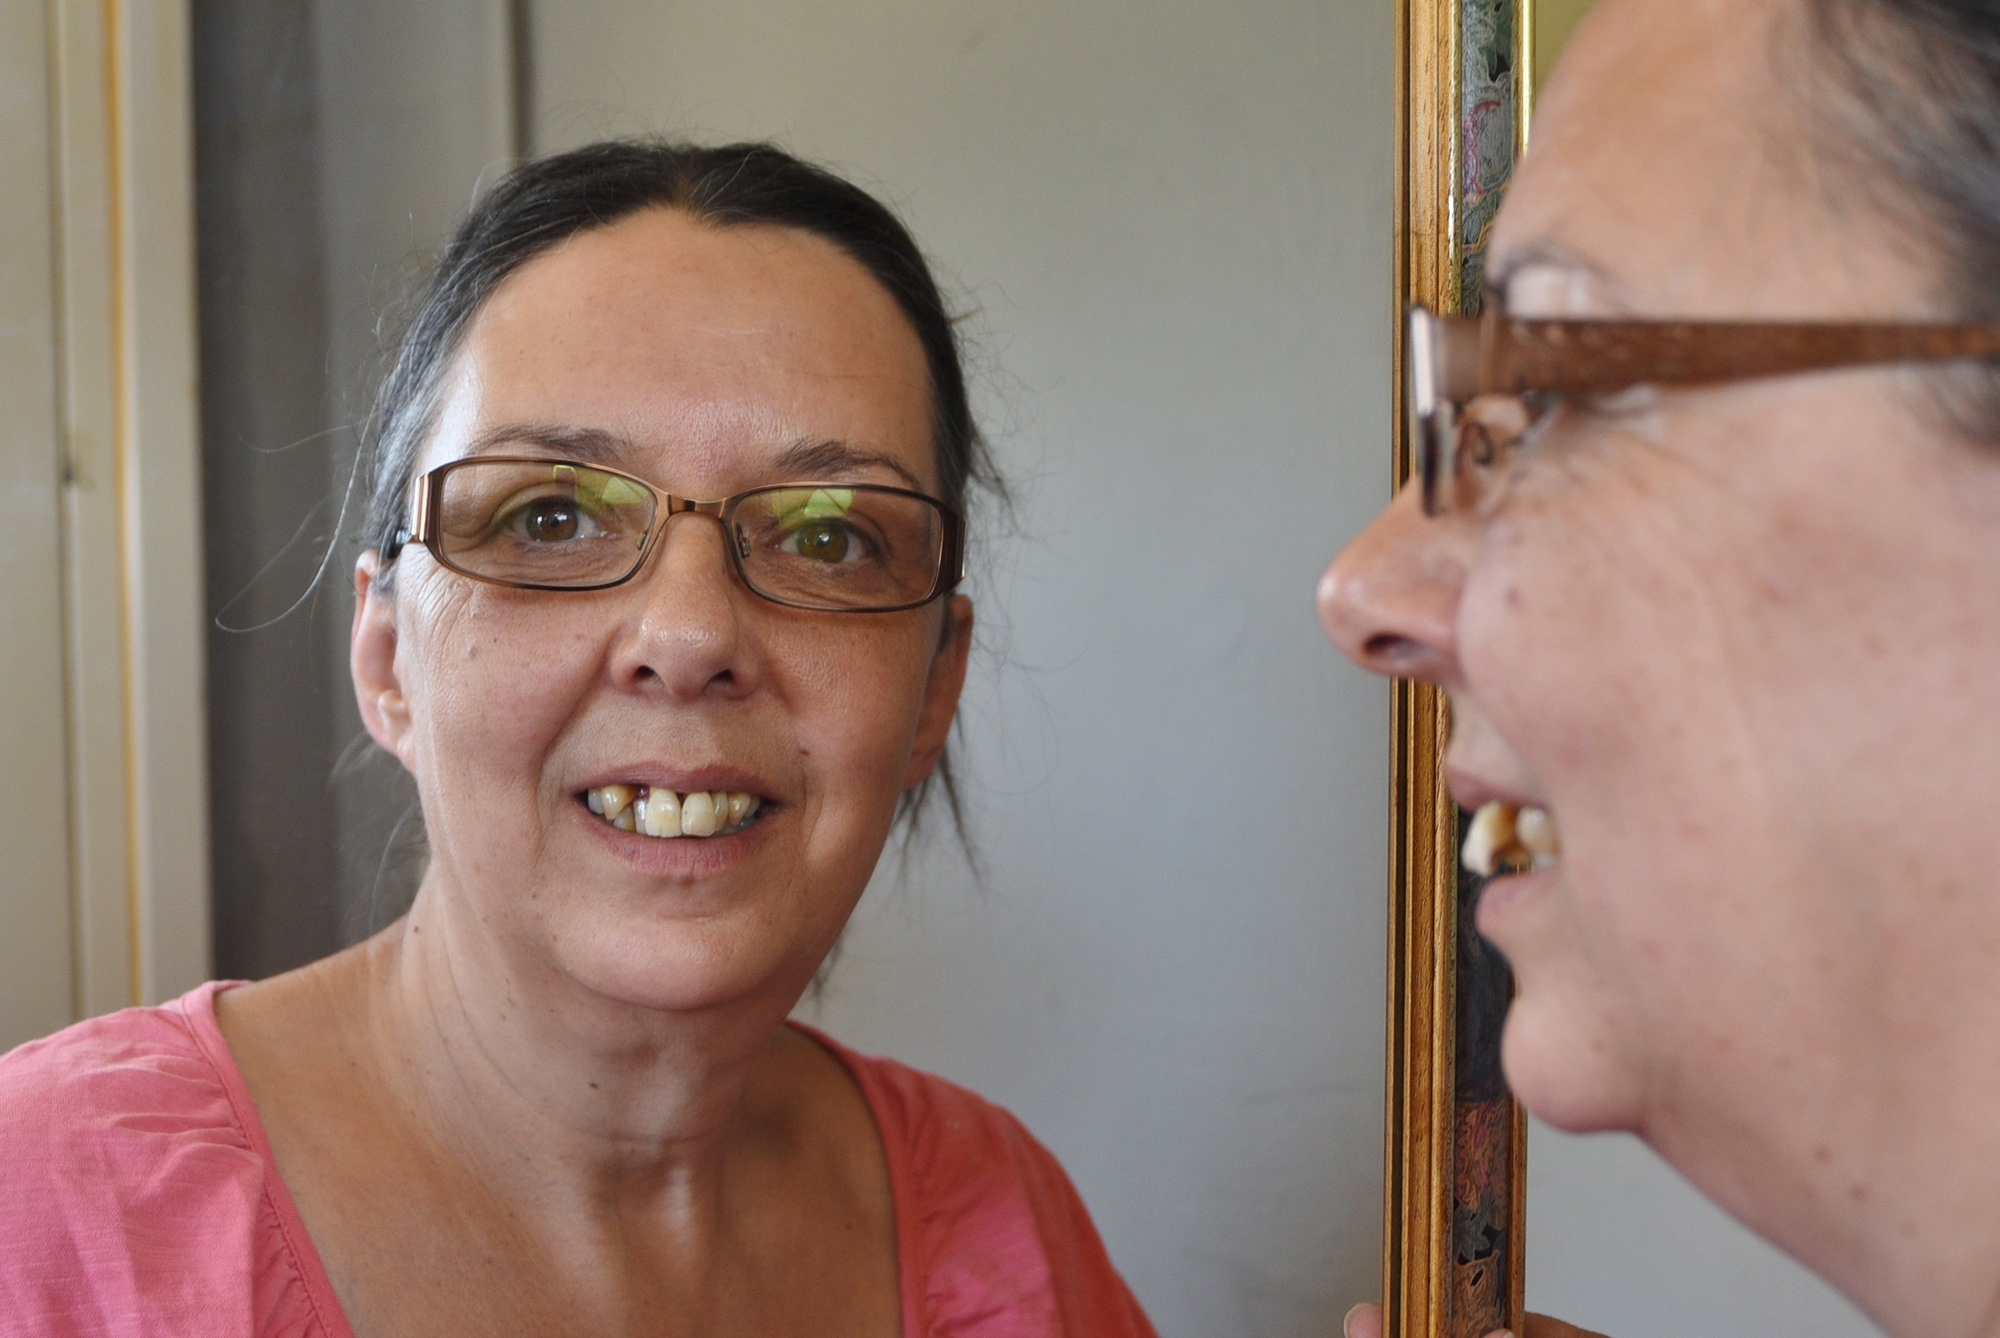 Three Time’s A Charm For Desperate Woman Who Pulled Her Teeth